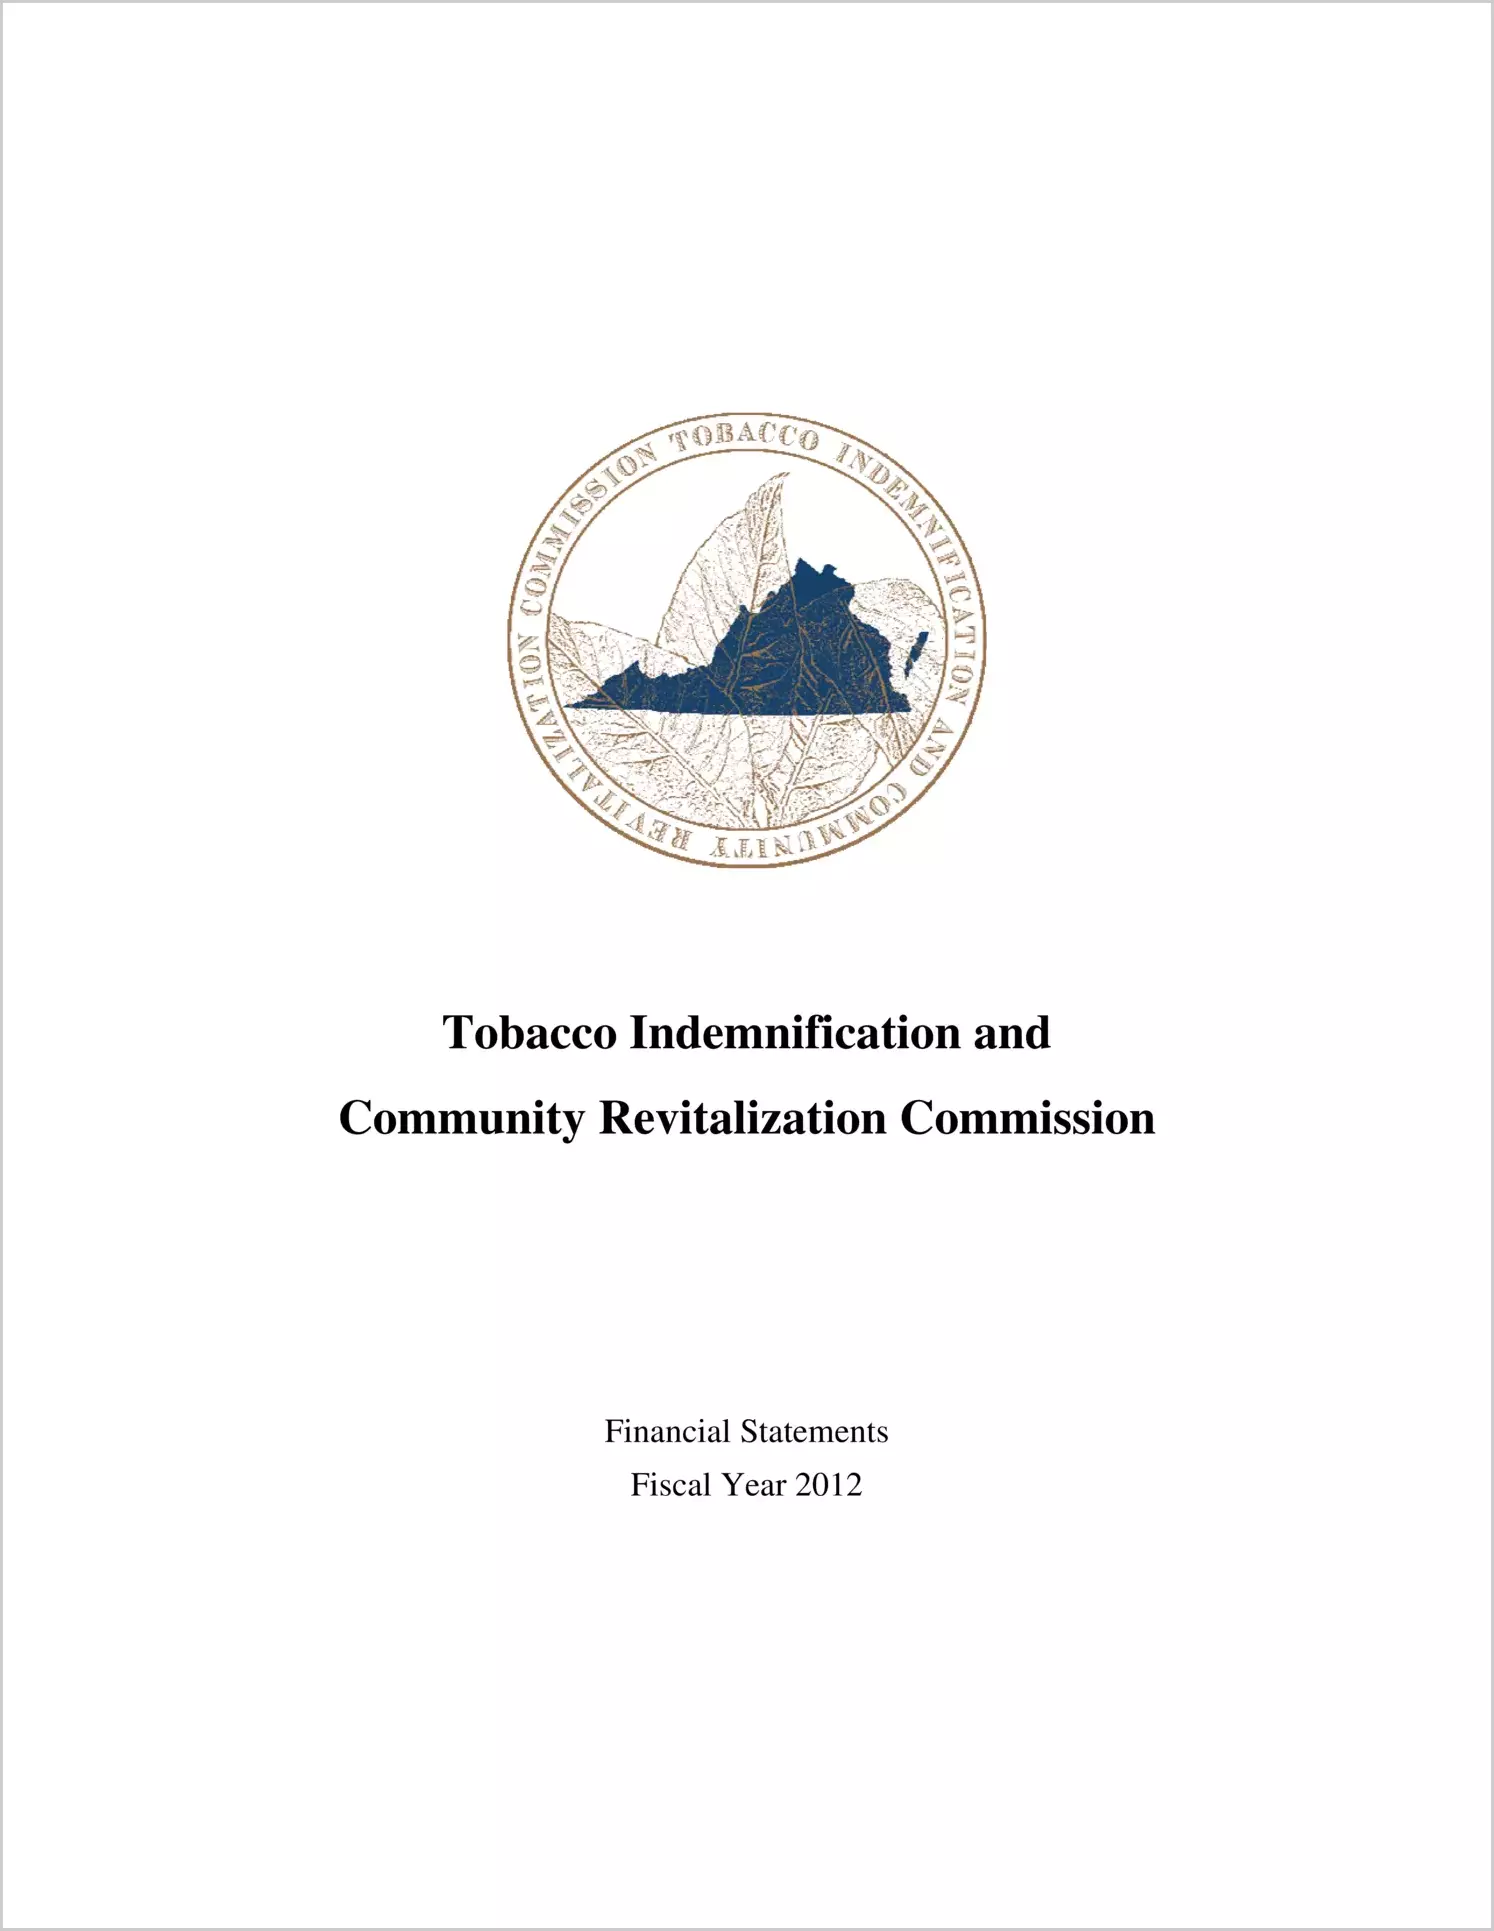 Tobacco Indemnification and Community Revitalization Commission Financial Statements for the year ended June 30, 2012